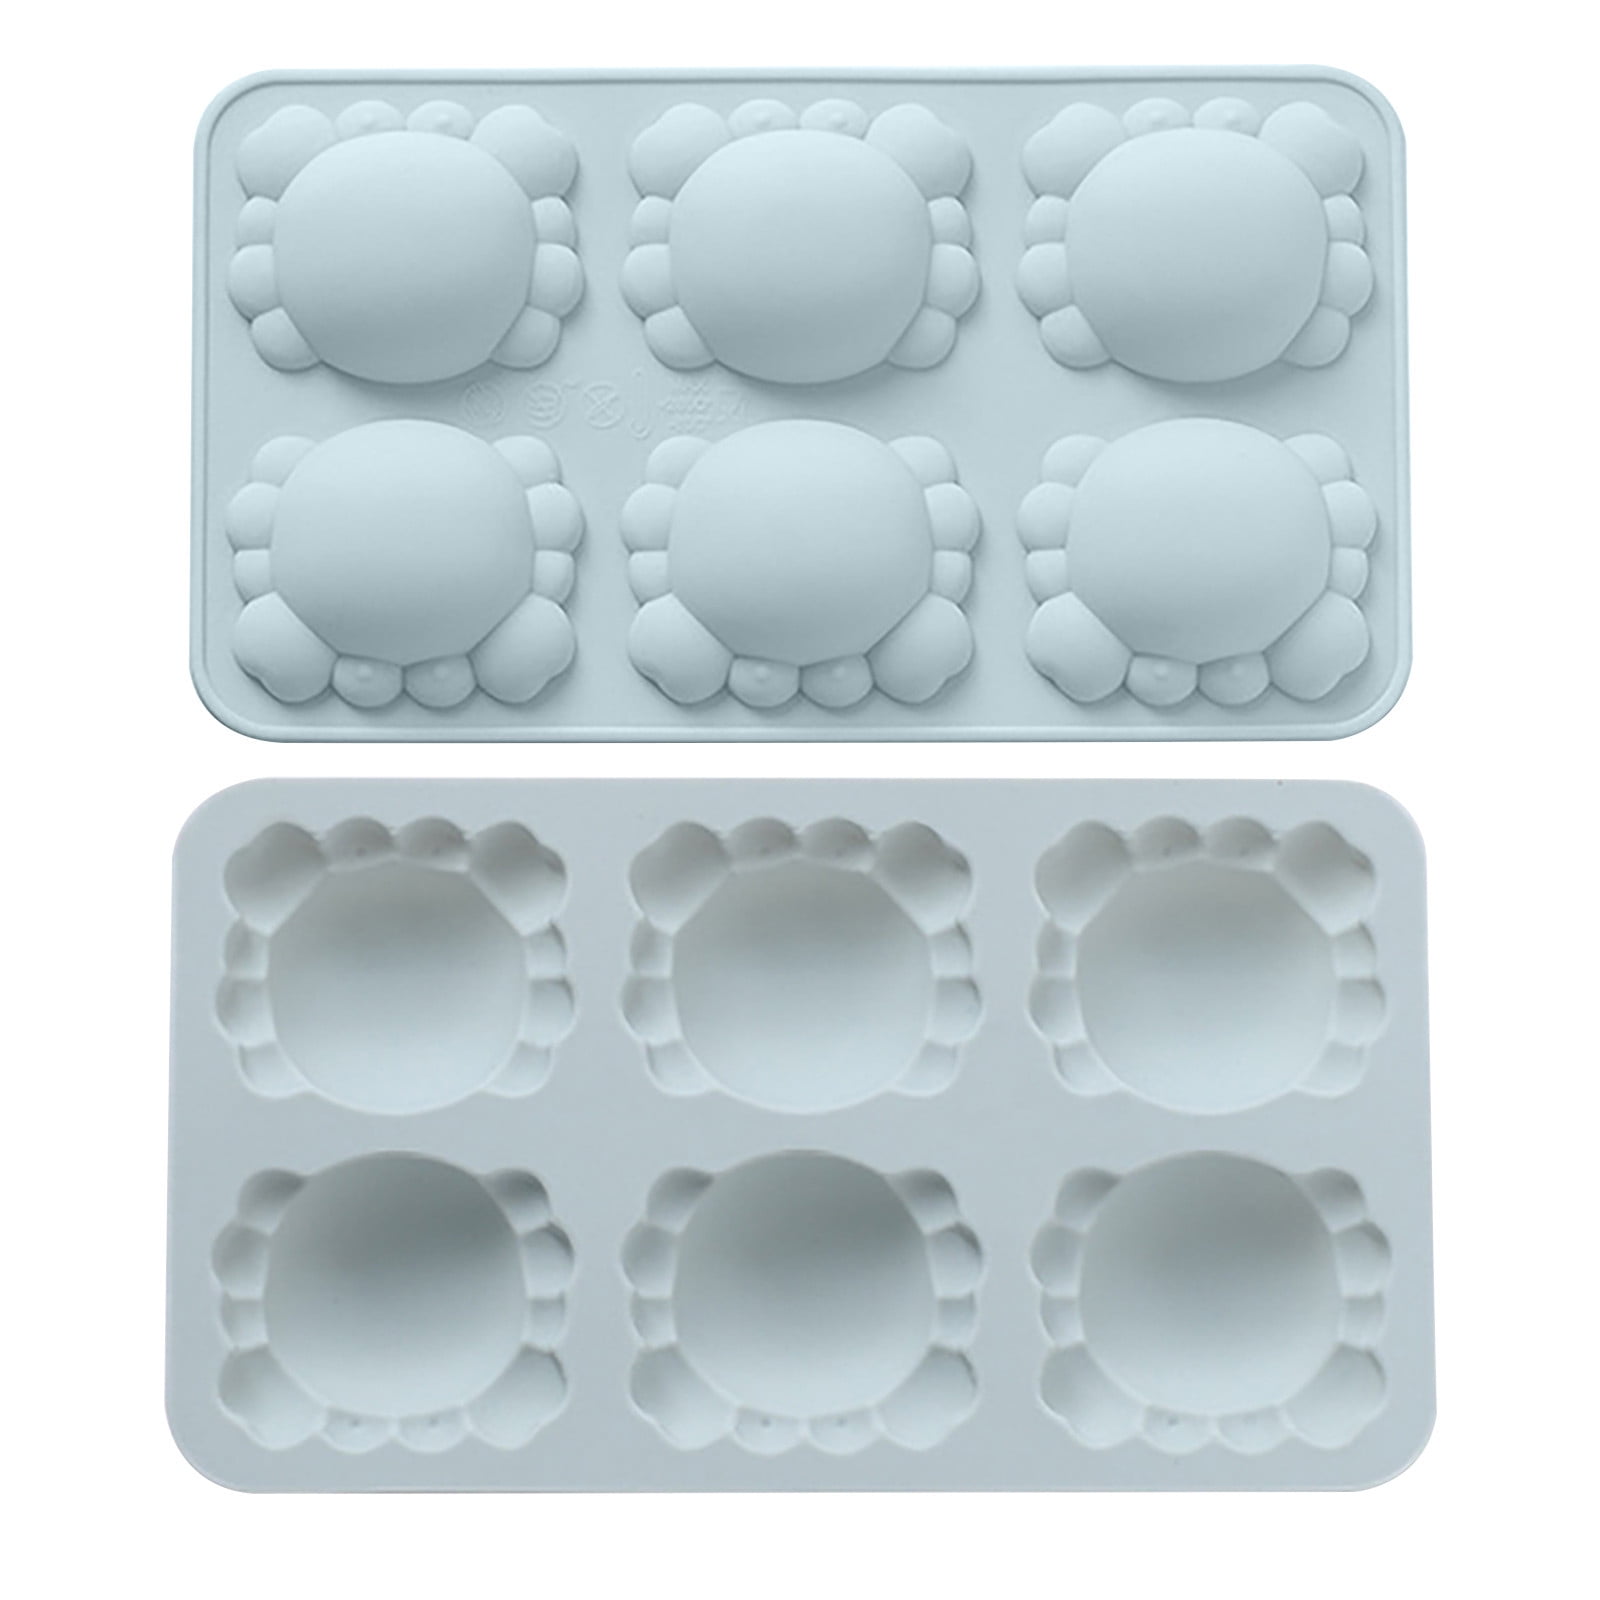 Silicone Cake Mould Muffin Chocolate Mold Baking Cup Mold Cookie non-stick G0L0 